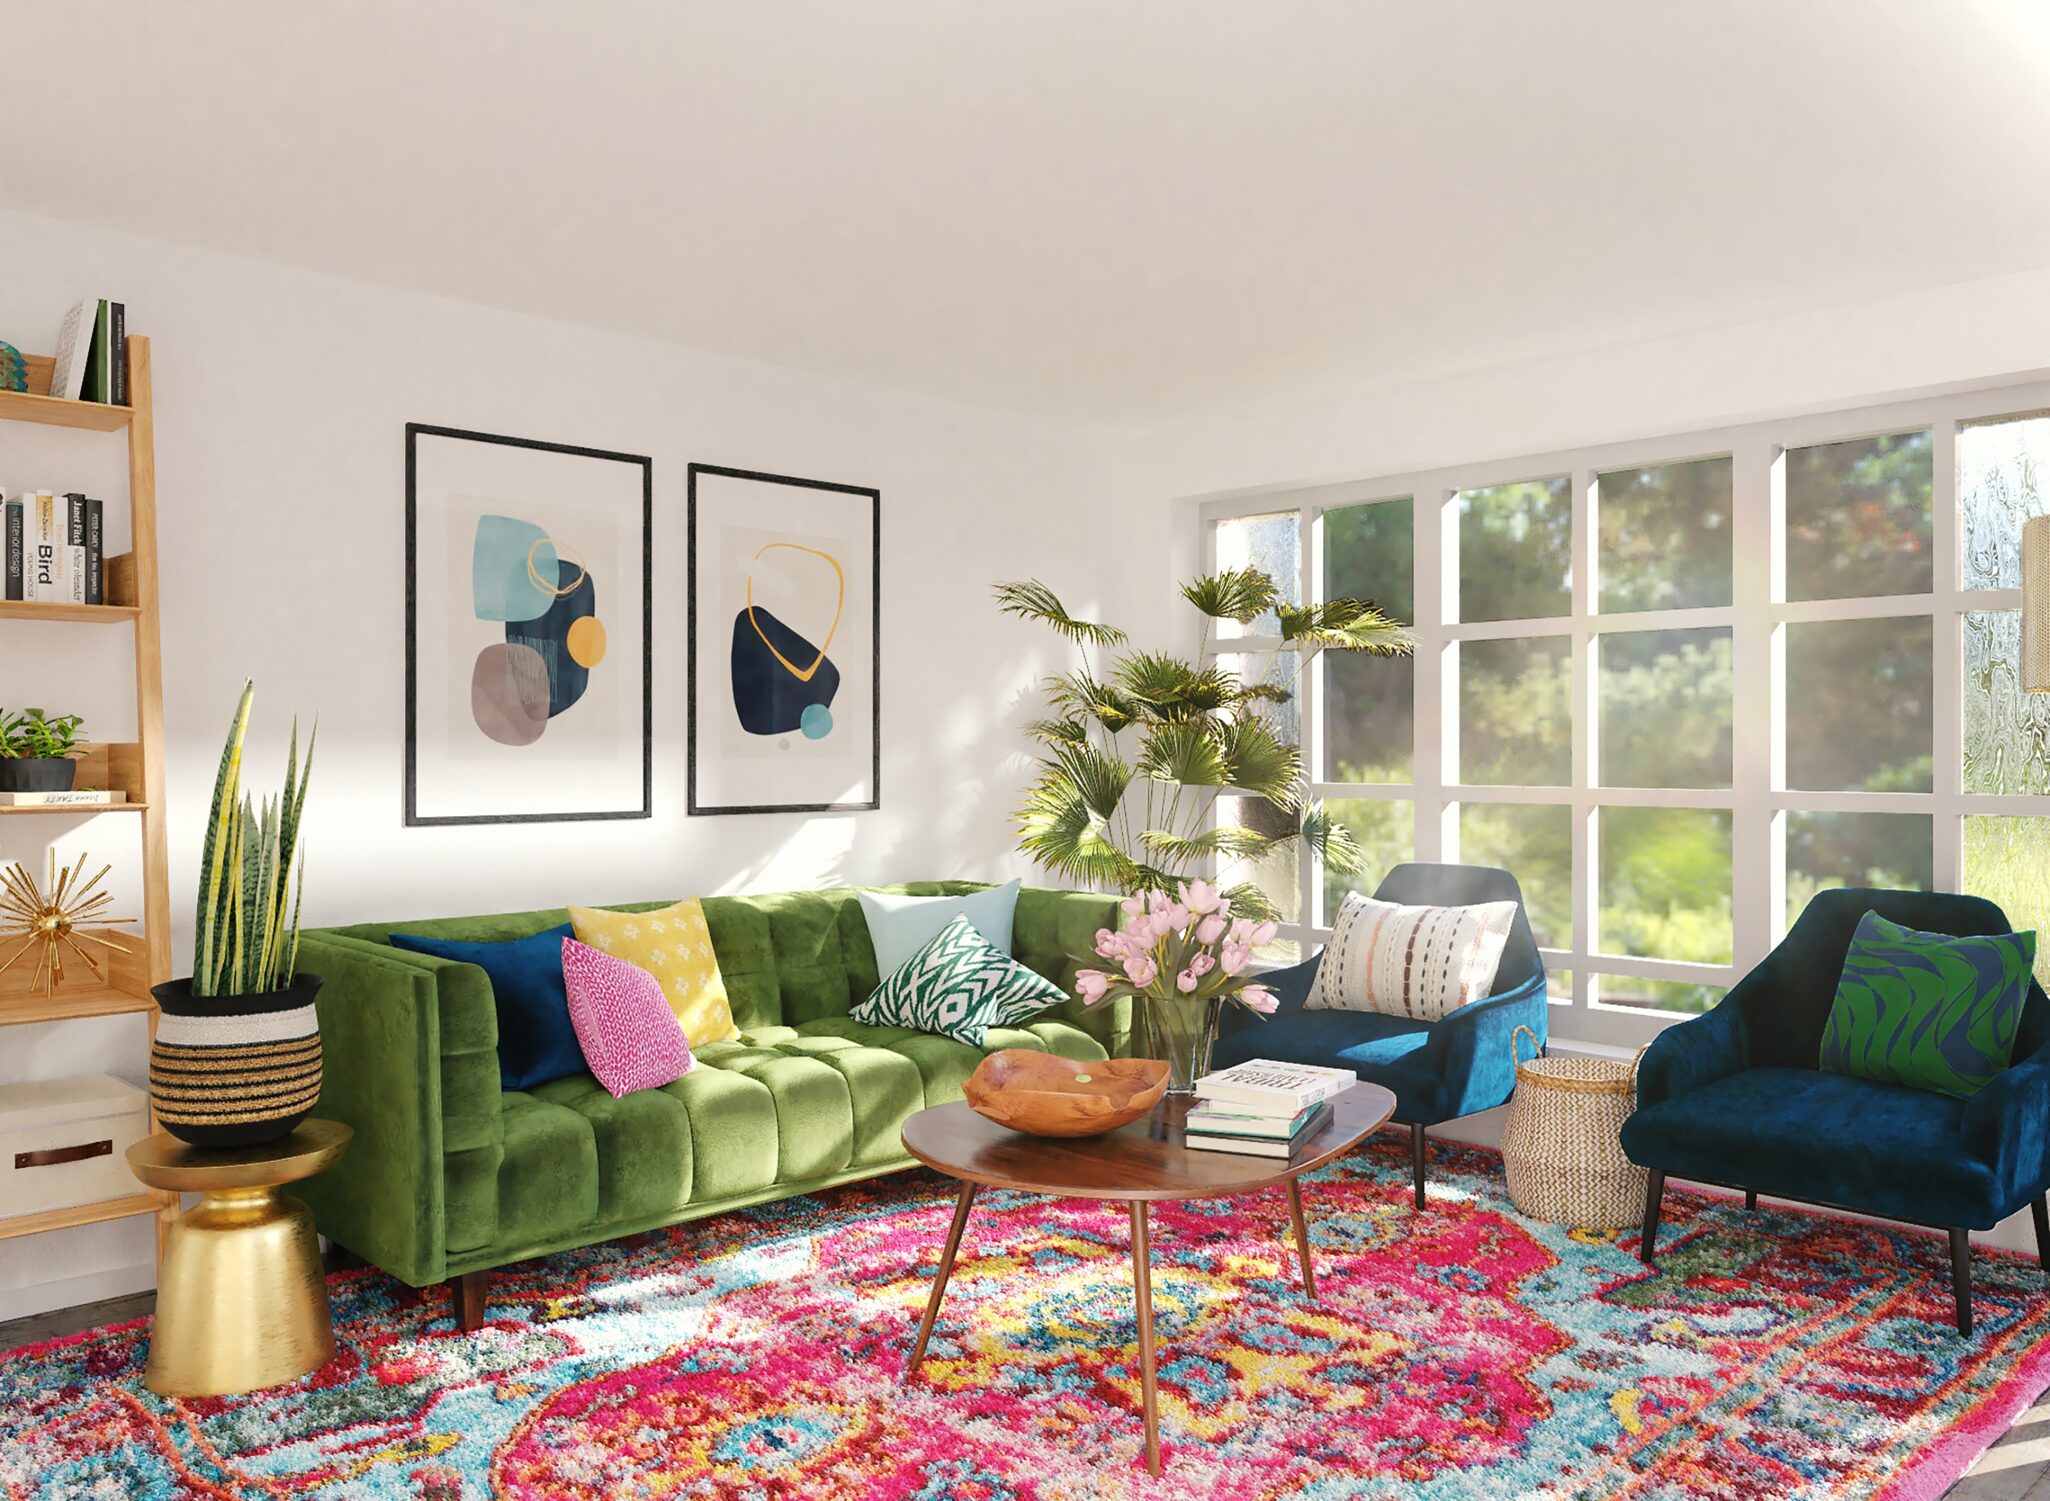 A vibrant, colorful living room with a multicolored rug, green velvet couch, and mid century modern style